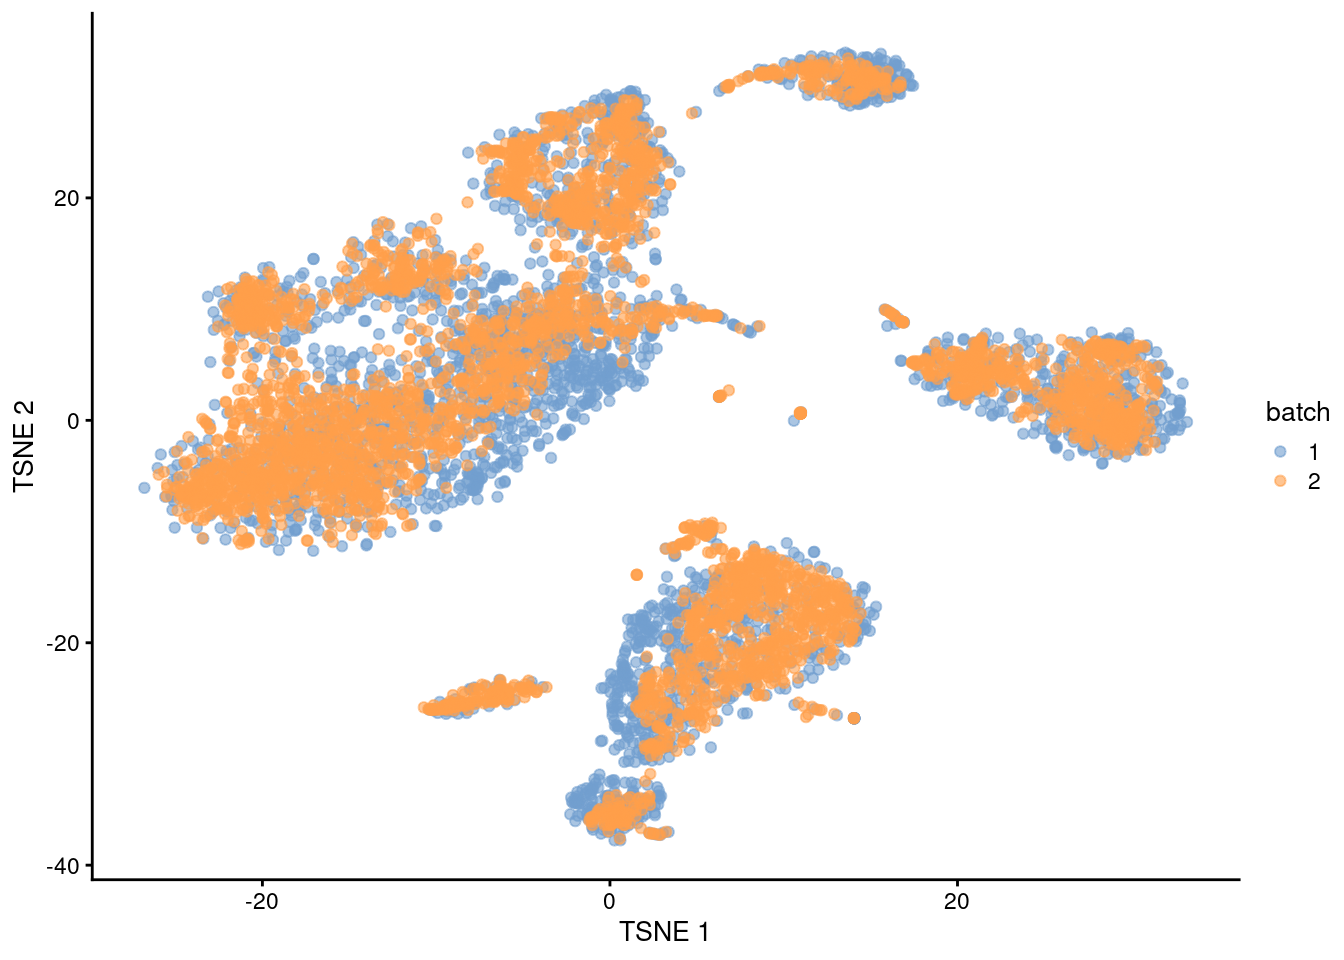 $t$-SNE plot of the PBMC datasets after MNN correction with `fastMNN()`. Each point is a cell that is colored according to its batch of origin.